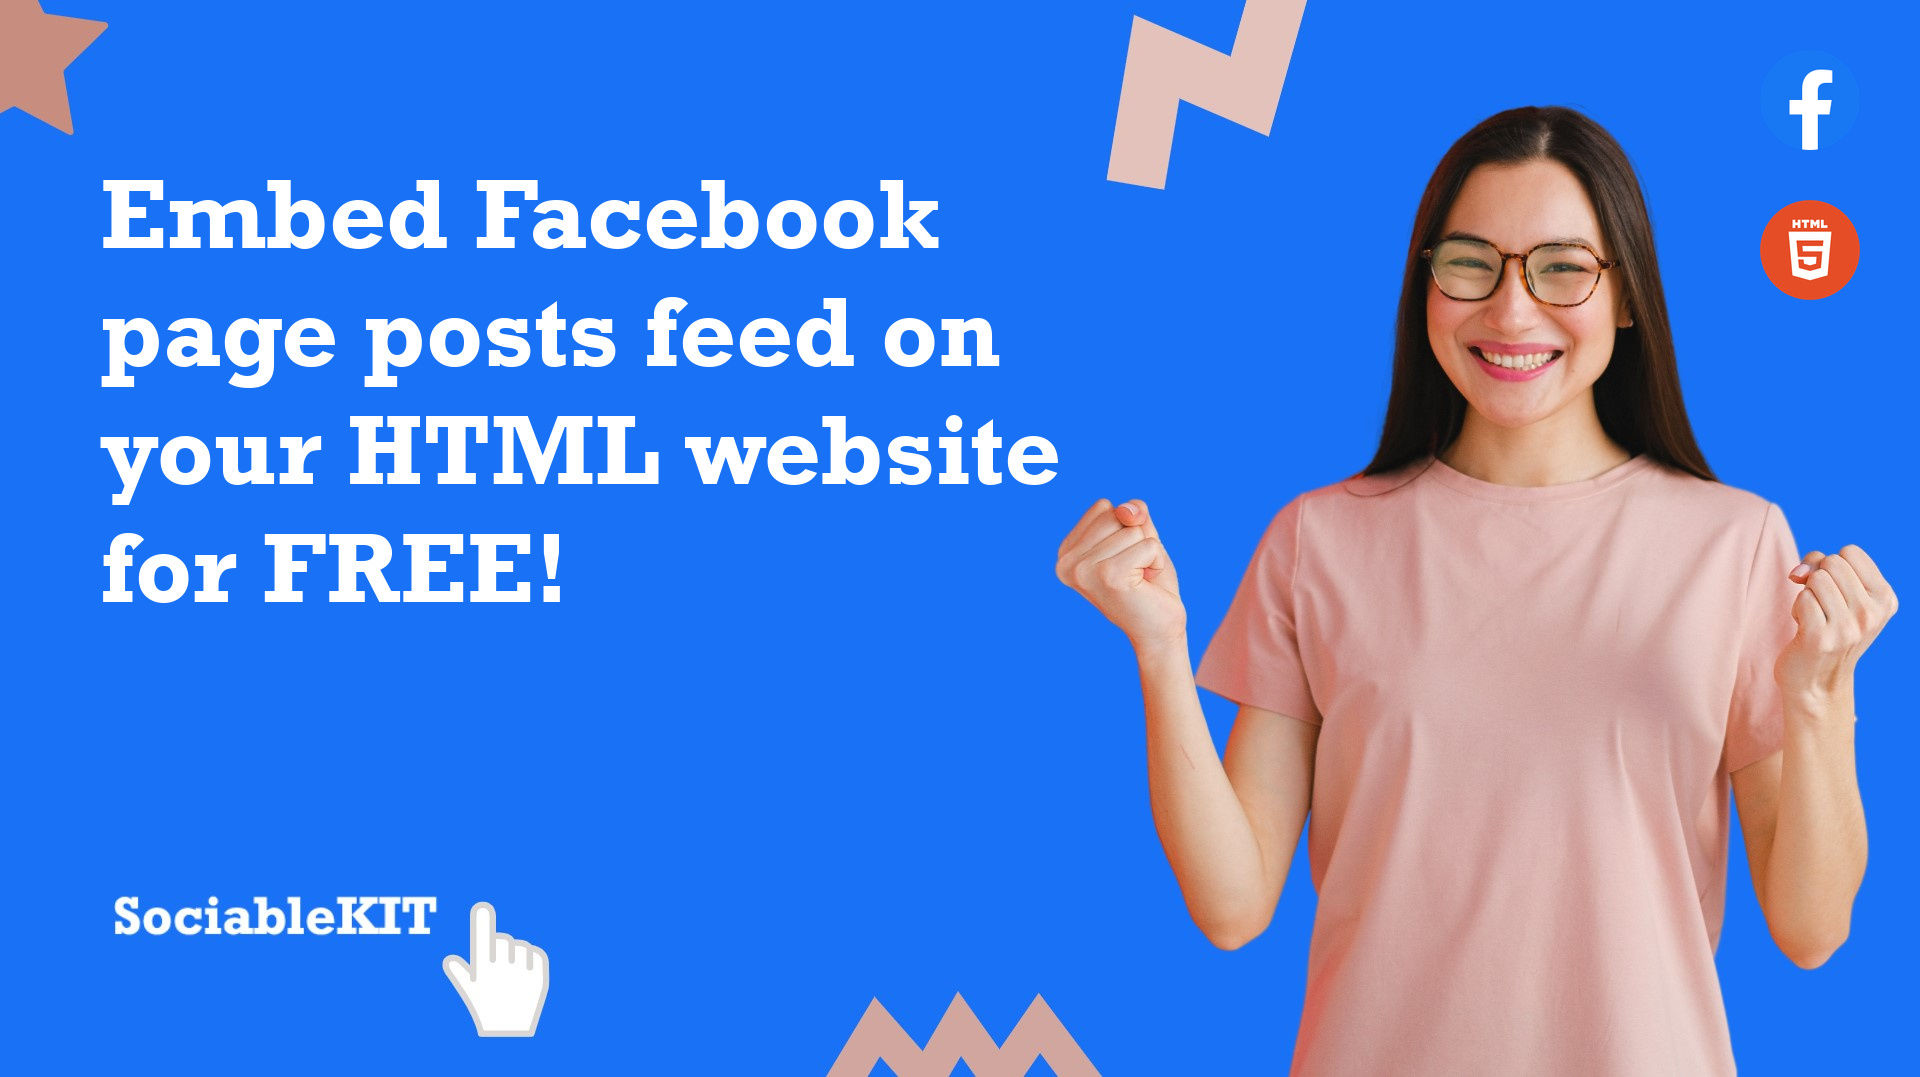 Introducing Home and Feeds on Facebook